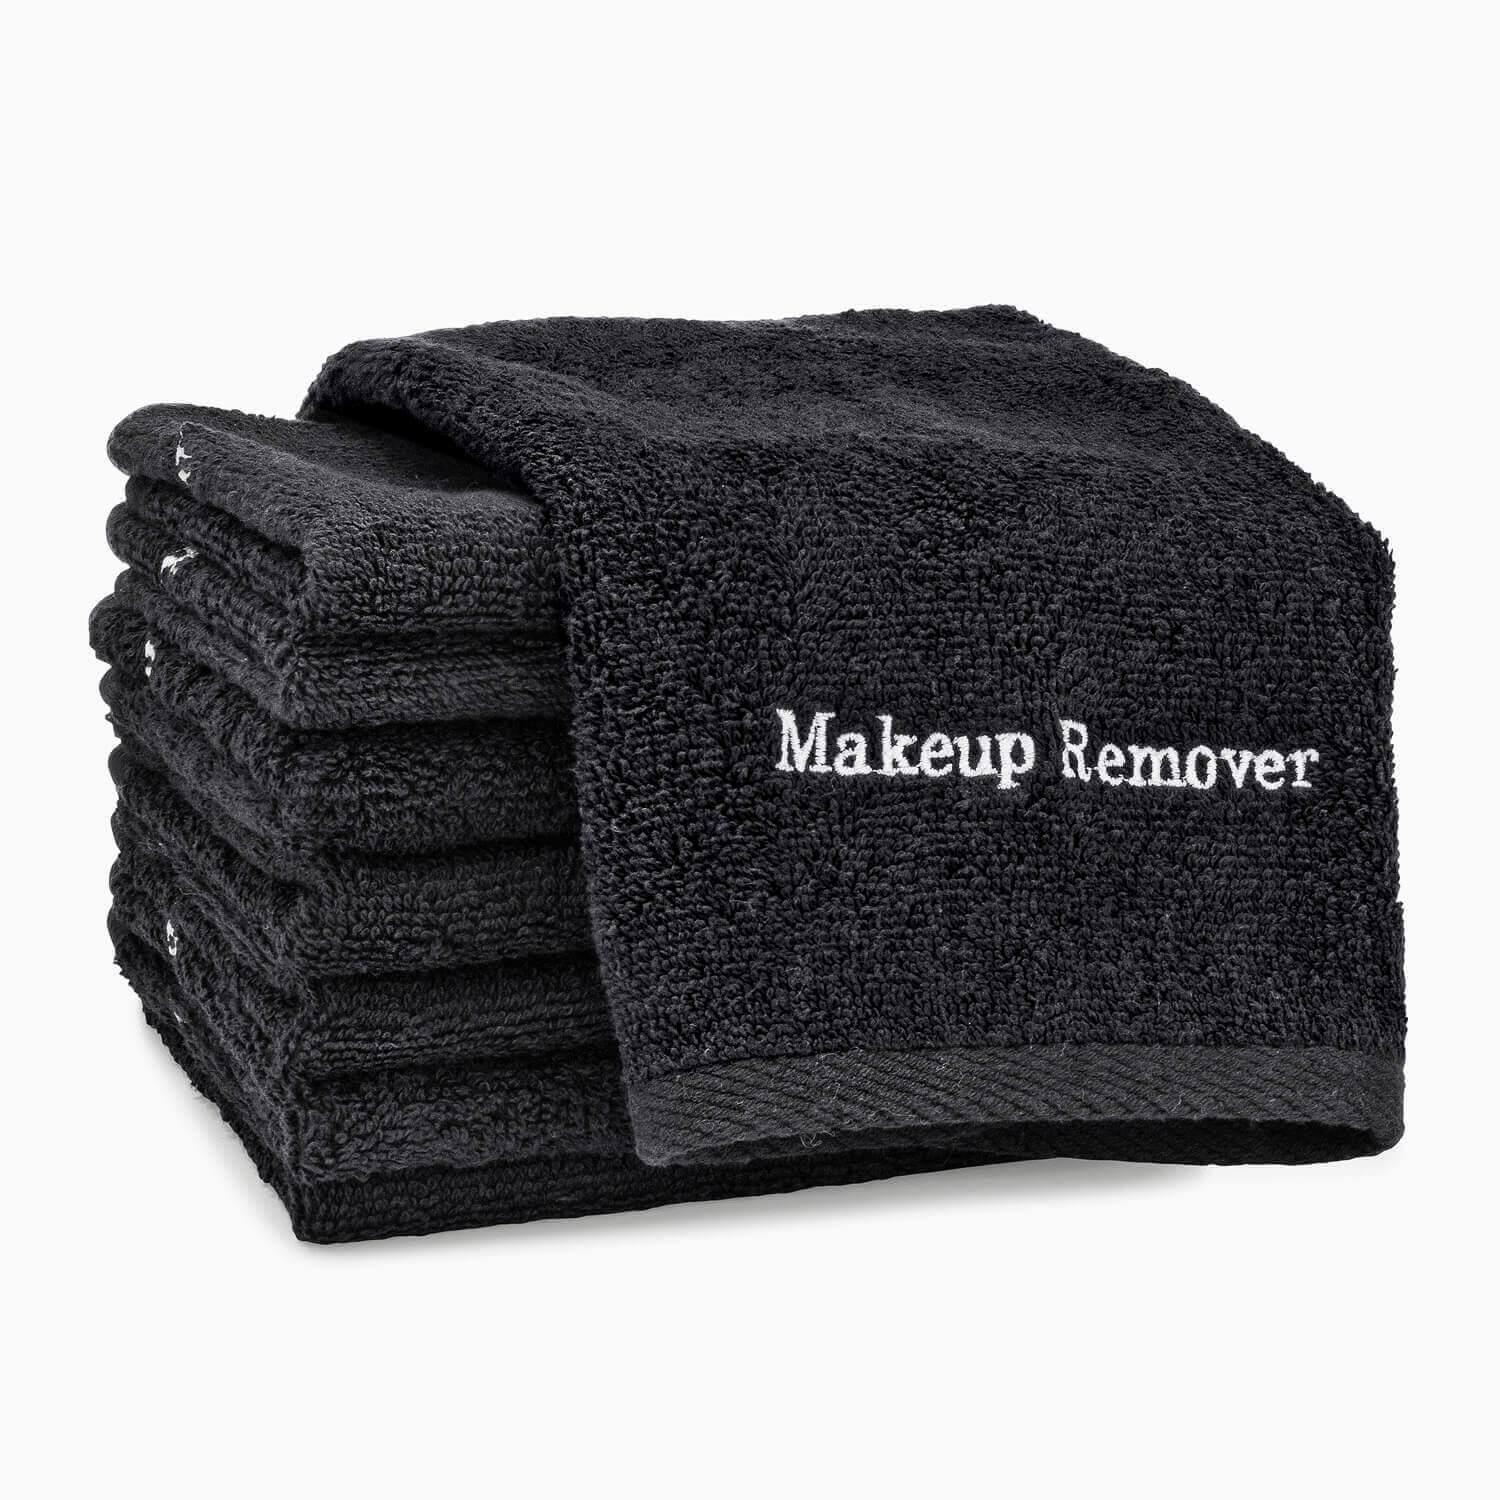 Registry Embroidered Makeup Remover Wash Cloth, 13 x 13, Black, Washcloths, Towels, Bed and Bath Linens, Open Catalog